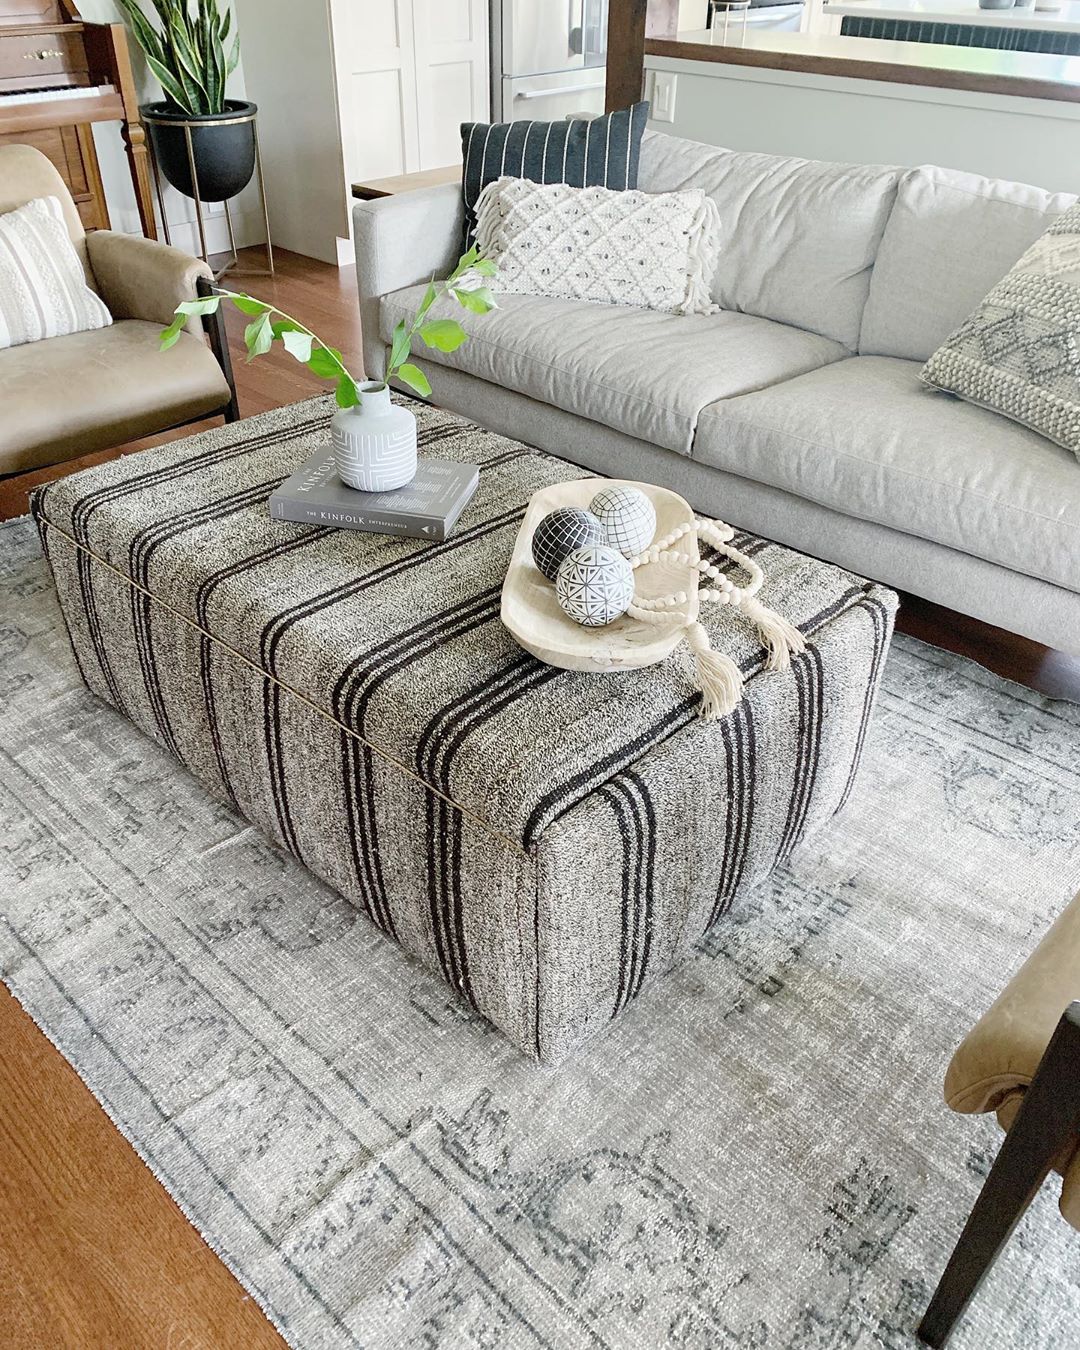 Storage Ottoman placed in the middle of a living room. Photo by Instagram user @courtneyungaro_spaceanddesign